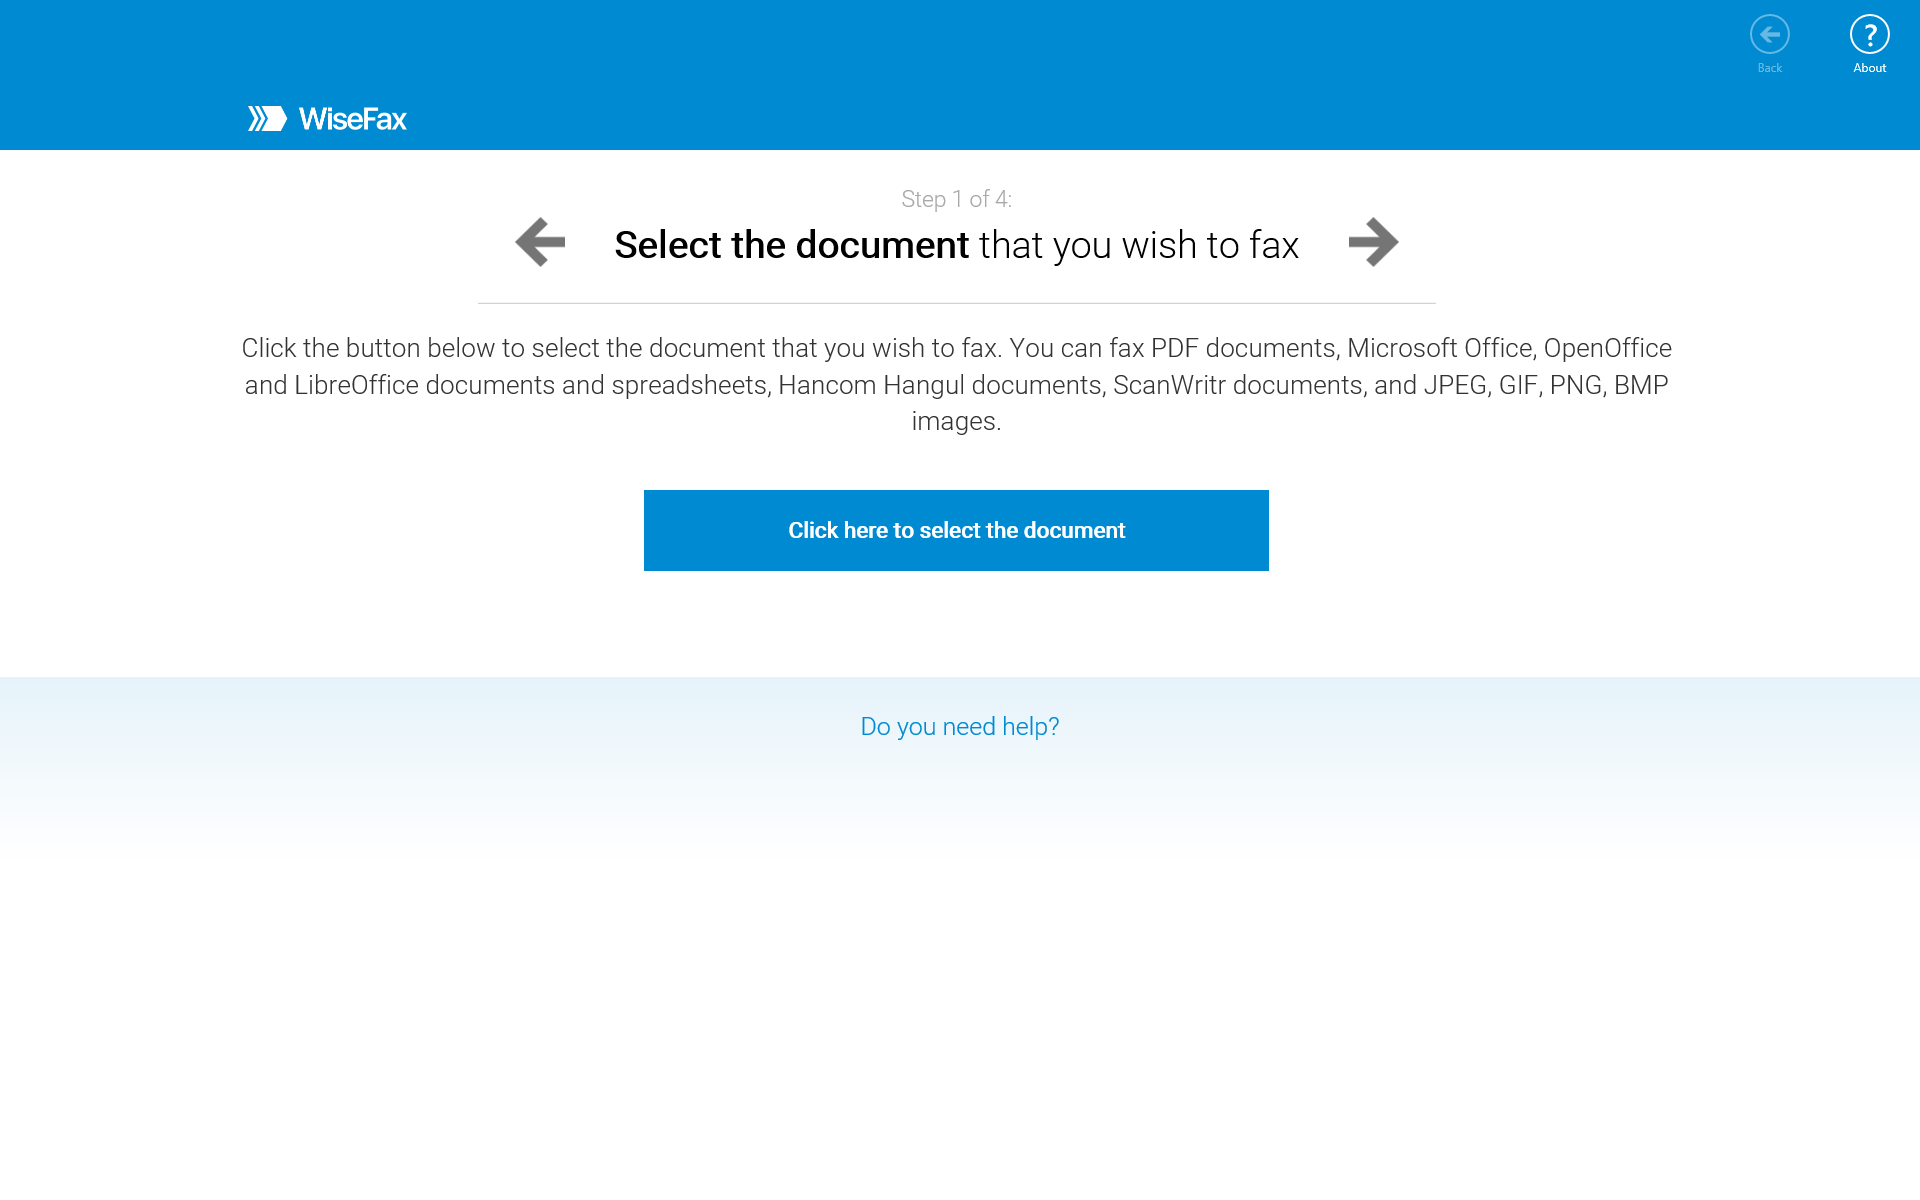 Step 1 - select document